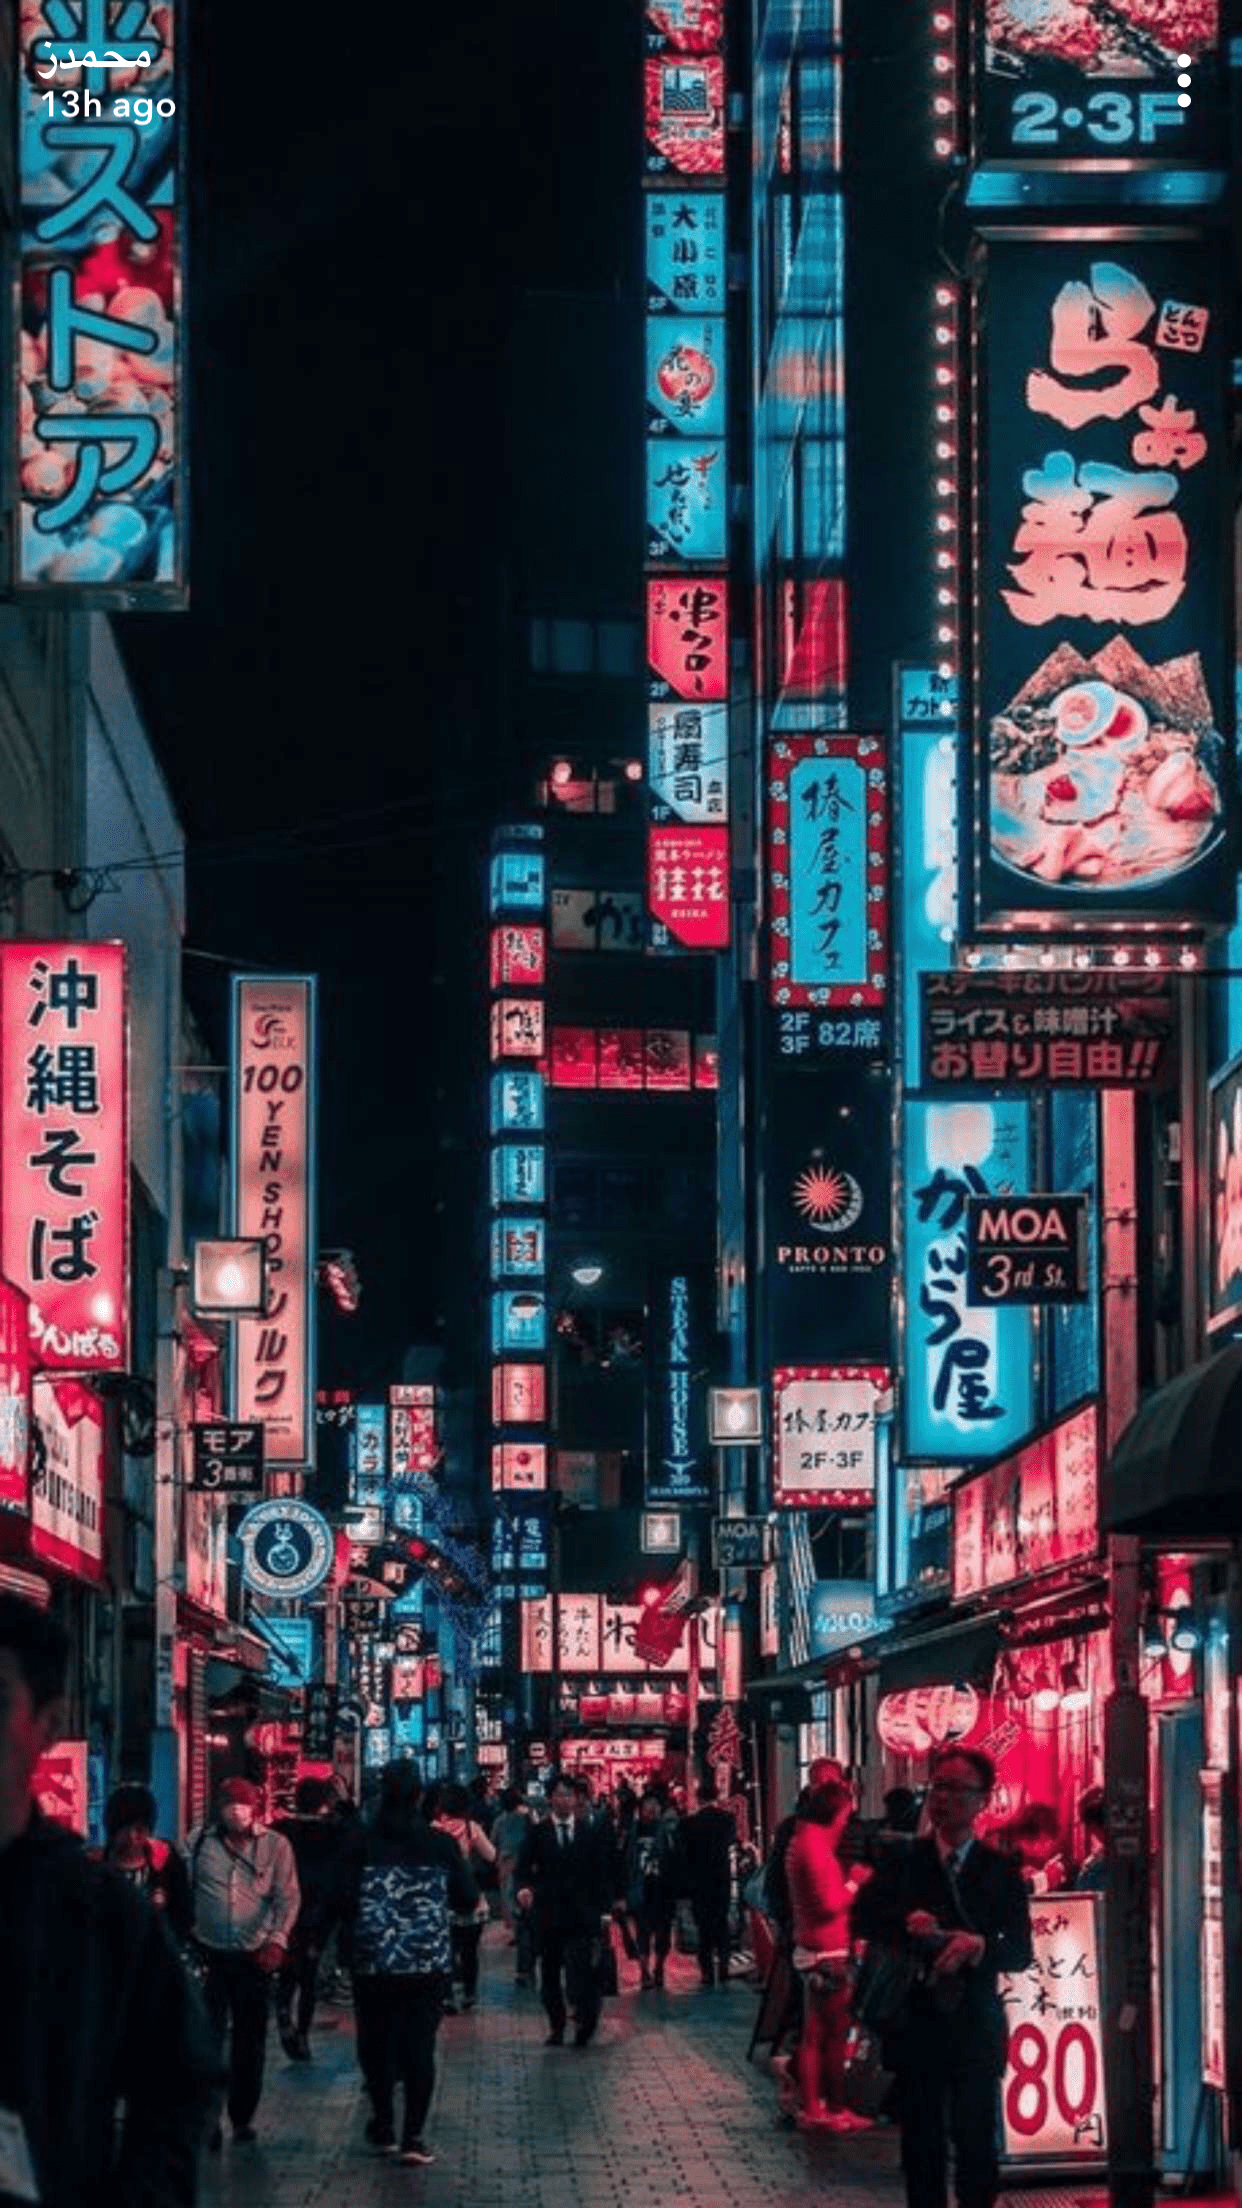 A bustling street in japan at night - Japanese, travel